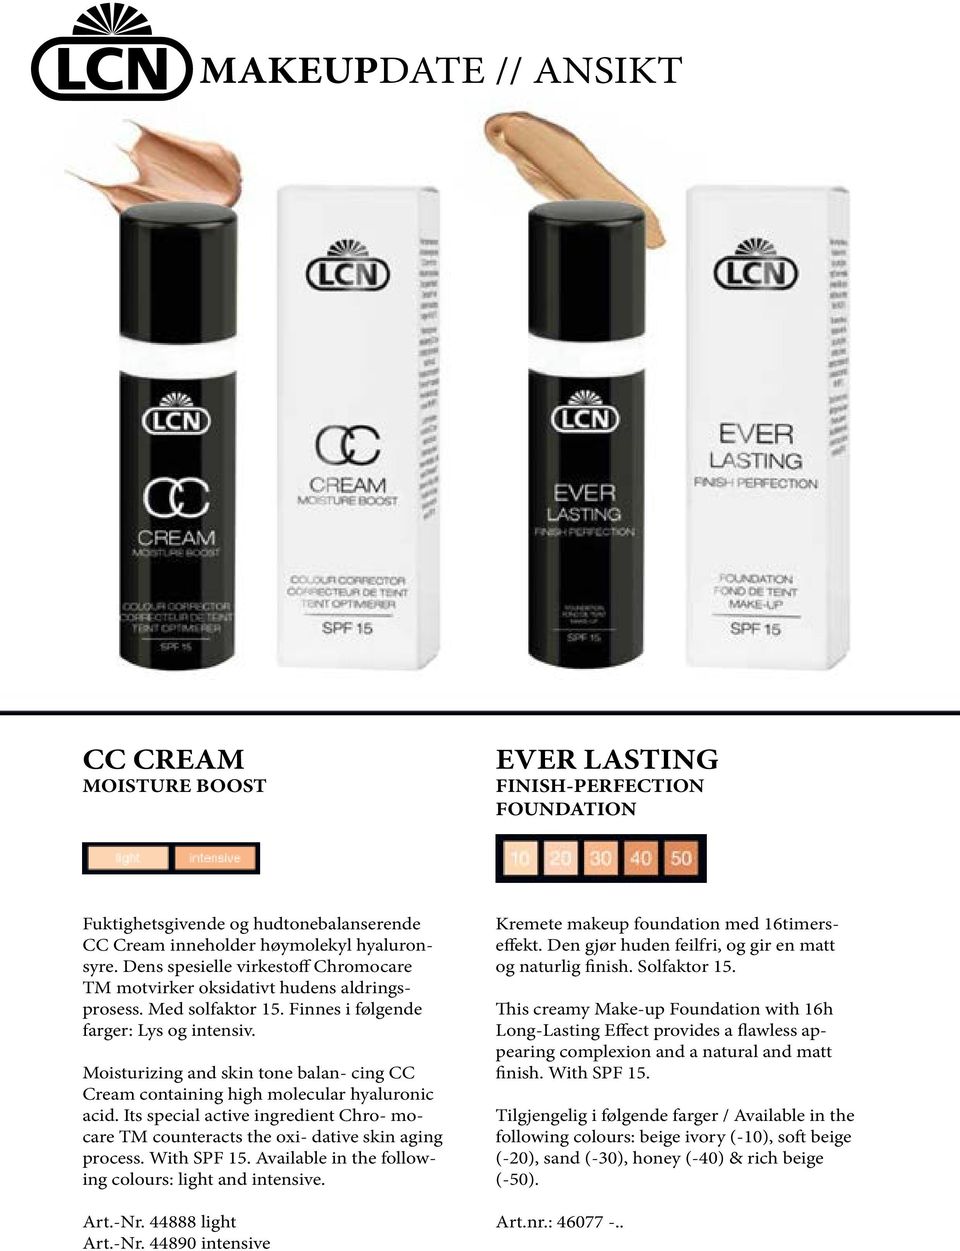 Moisturizing and skin tone balan- cing CC Cream containing high molecular hyaluronic acid. Its special active ingredient Chro- mocare TM counteracts the oxi- dative skin aging process. With SPF 15.